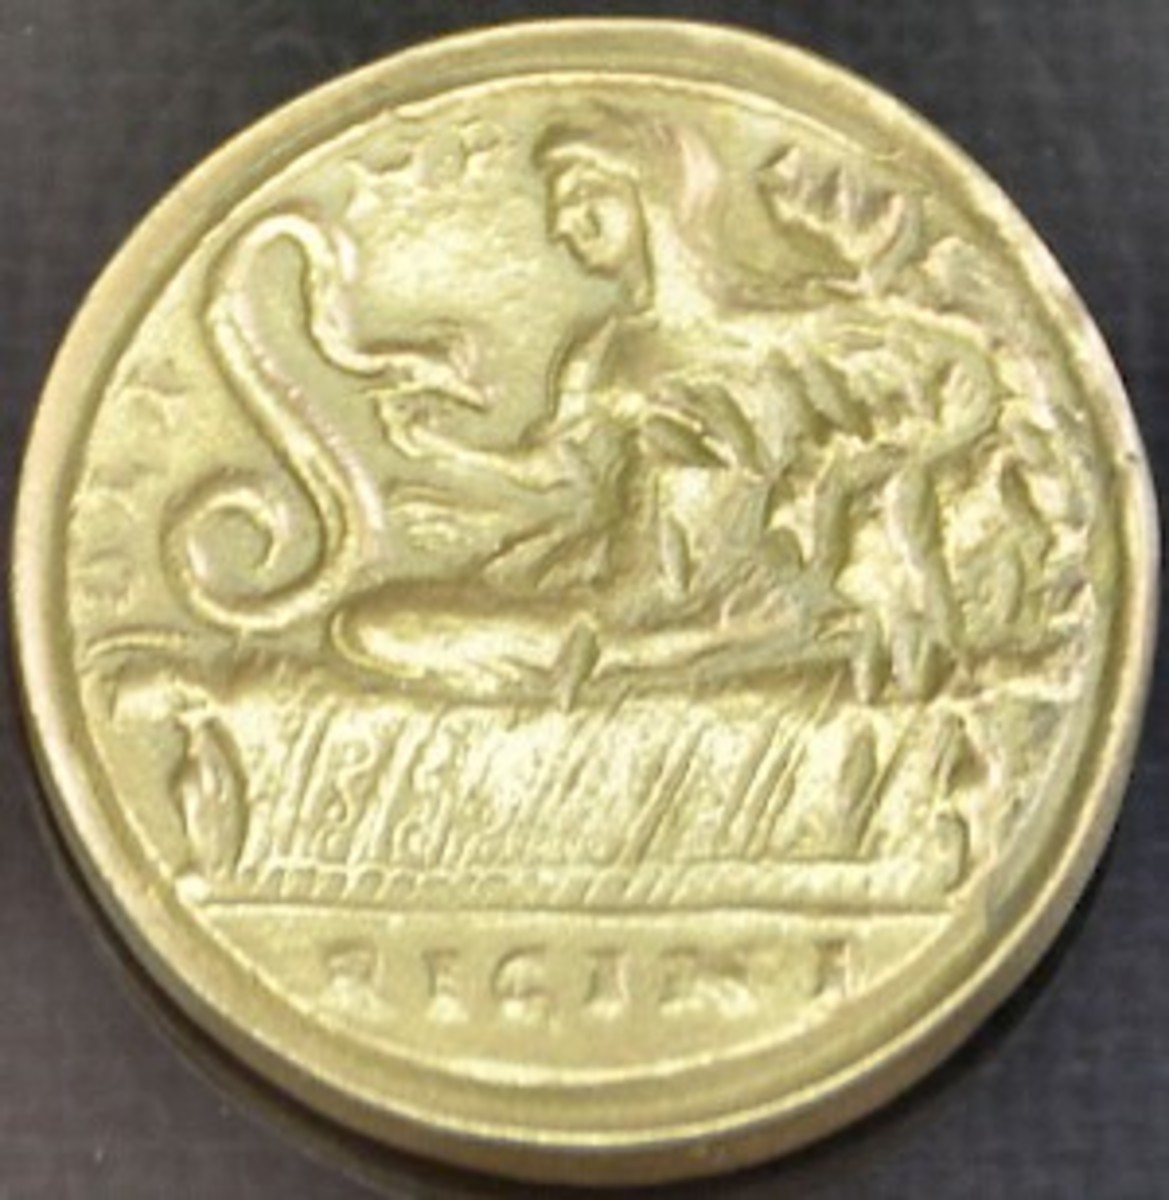 Roman contorniate, showing Olympias and her snakes